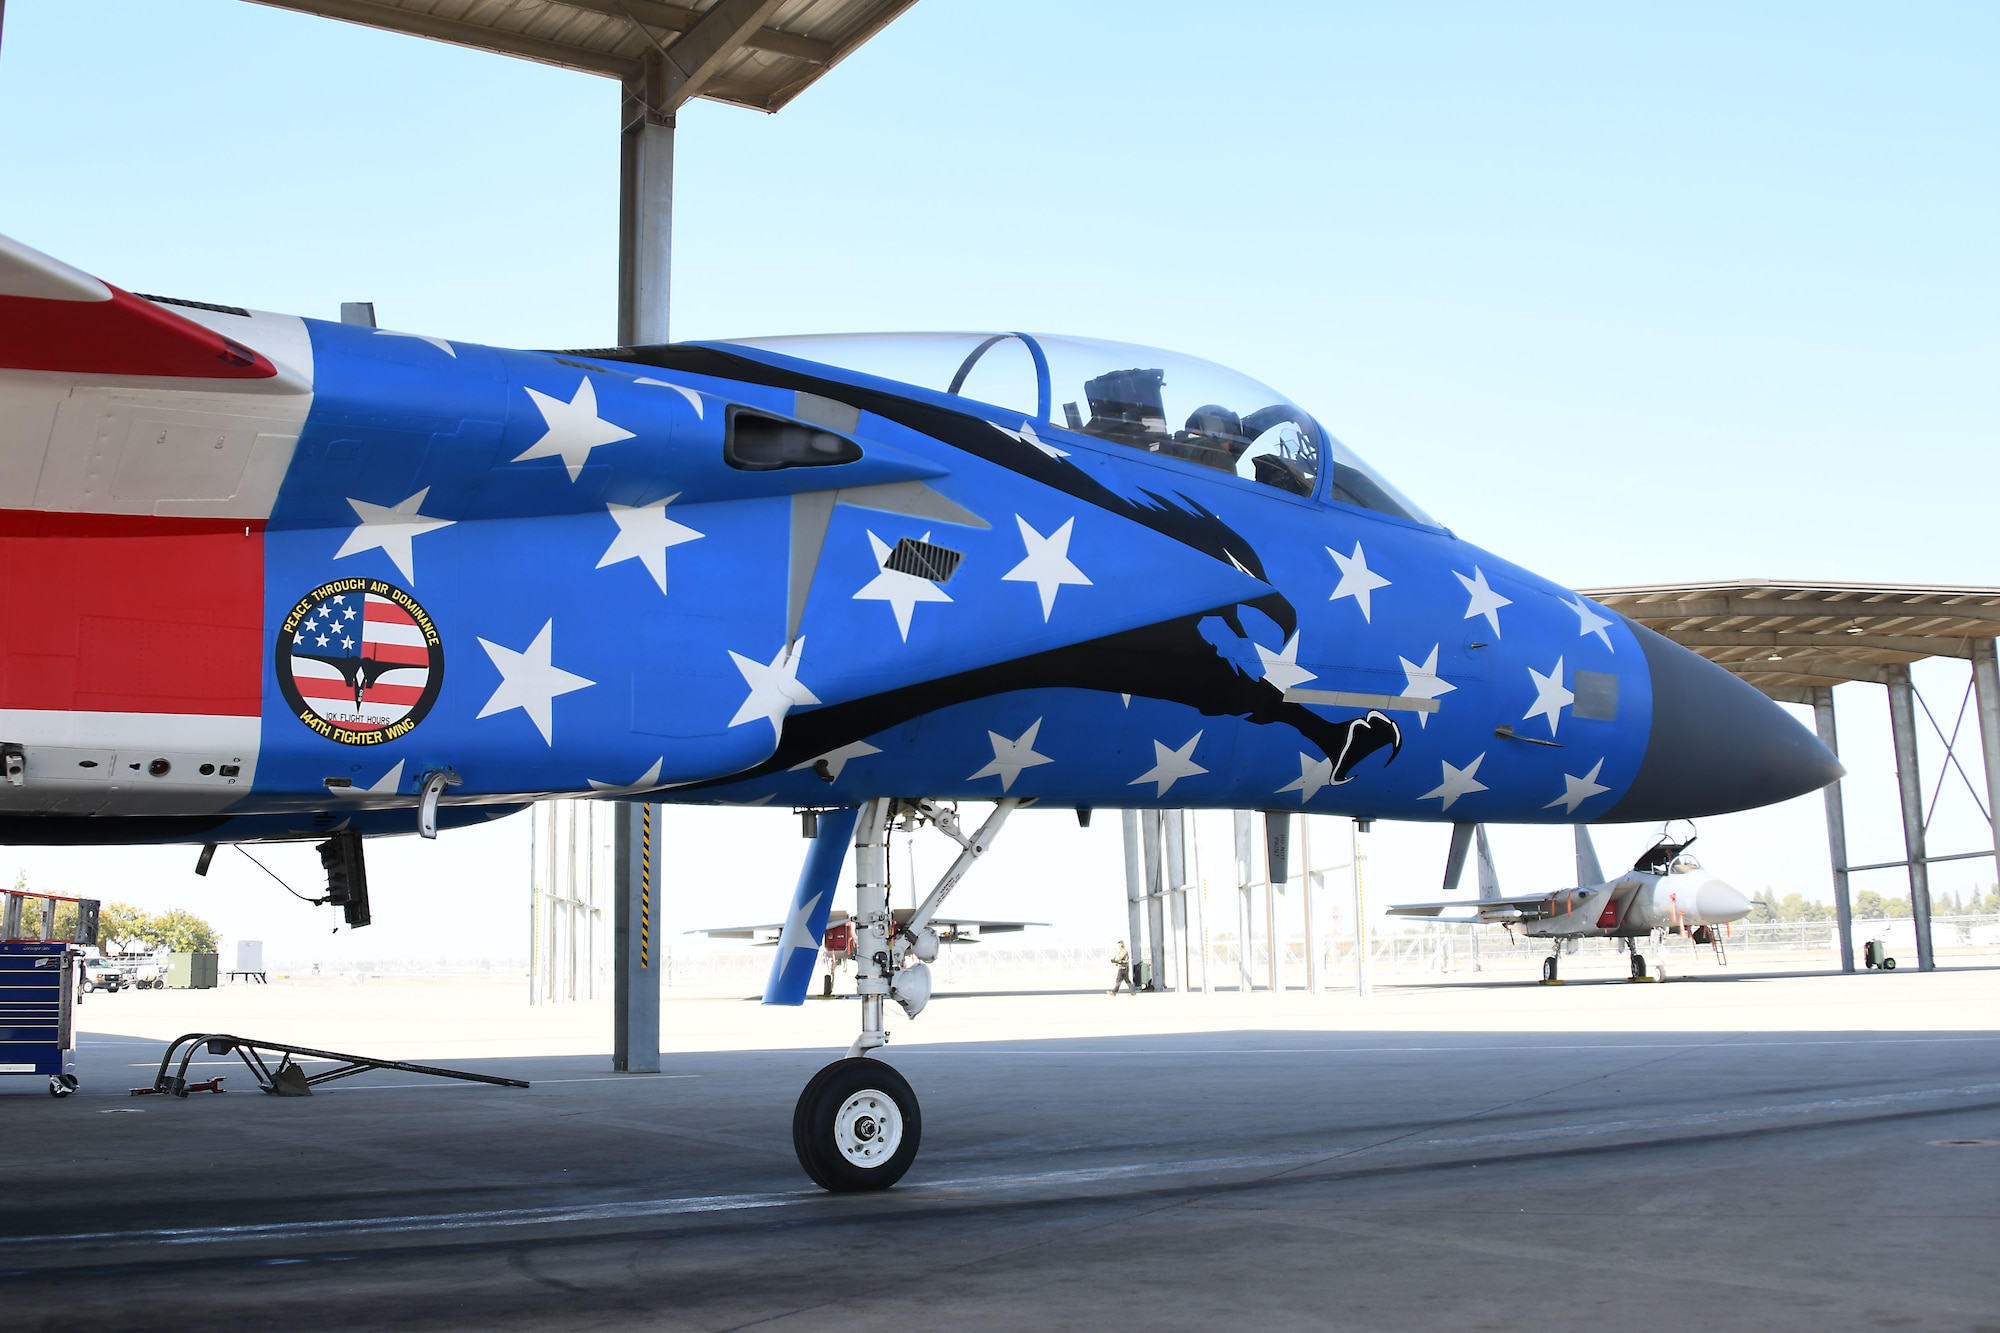 Fighter aircraft is parked in bay with a pilot in the cockpit. The unique paintjob shows white stars with a blue background over the fuselage of the aircraft.